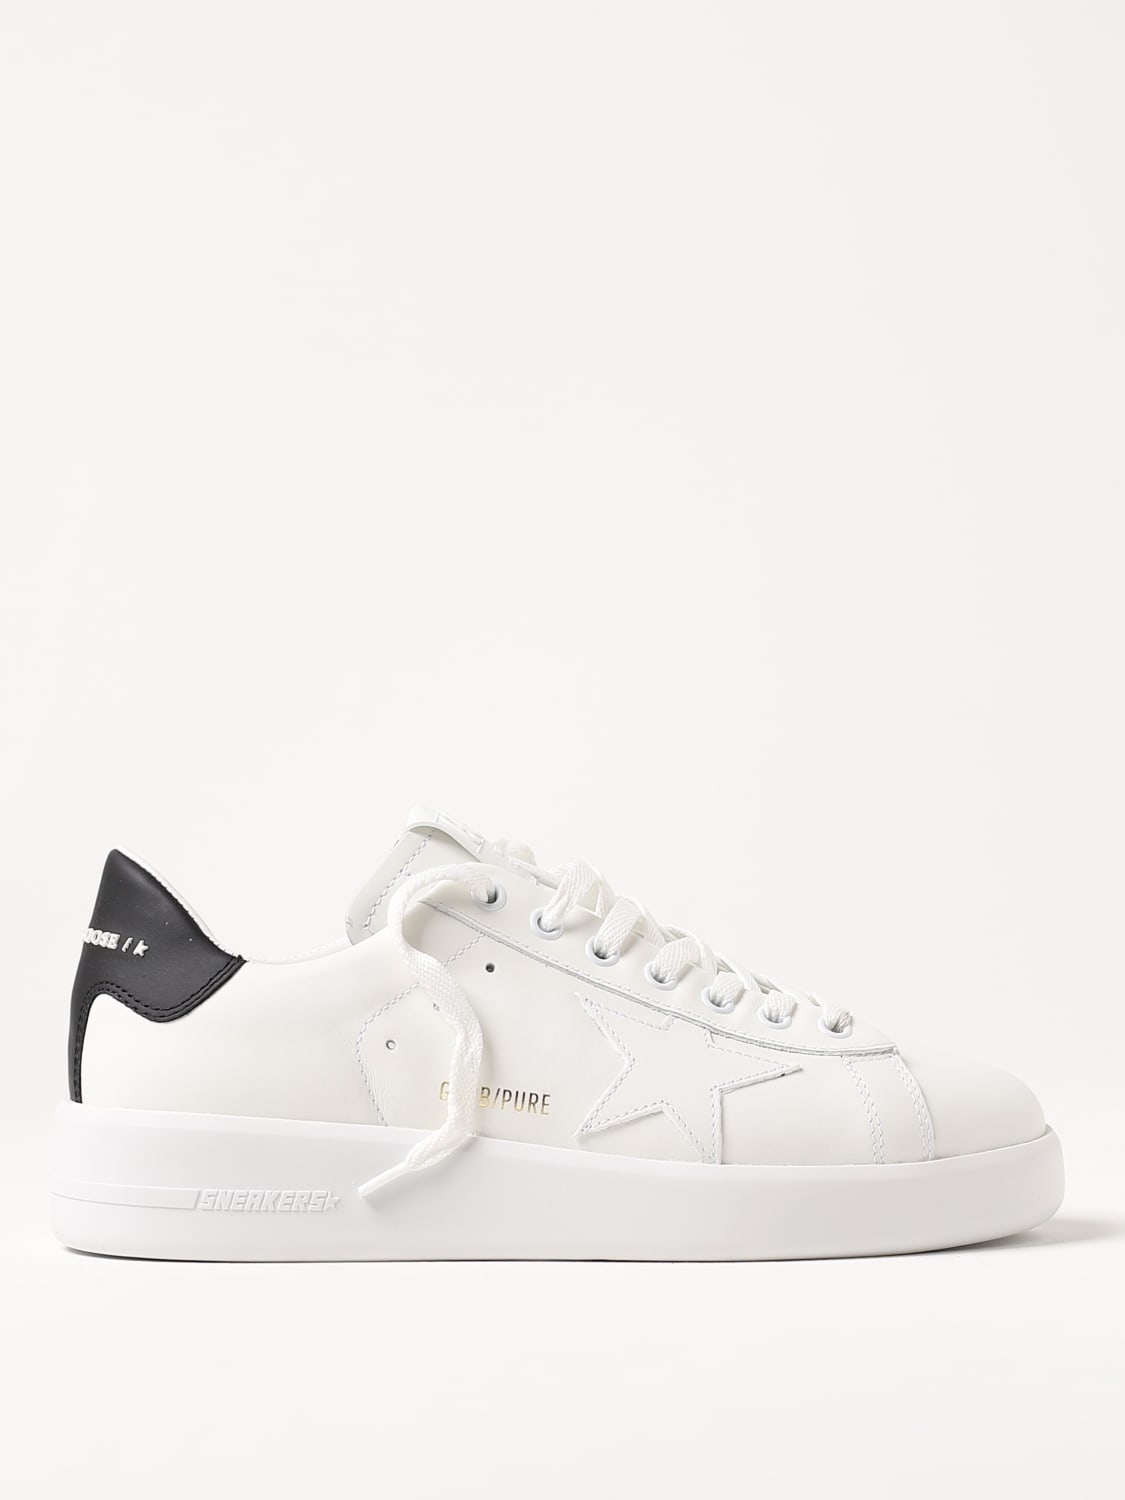 GOLDEN GOOSE: Pure New leather sneakers - White | Golden Goose sneakers ...